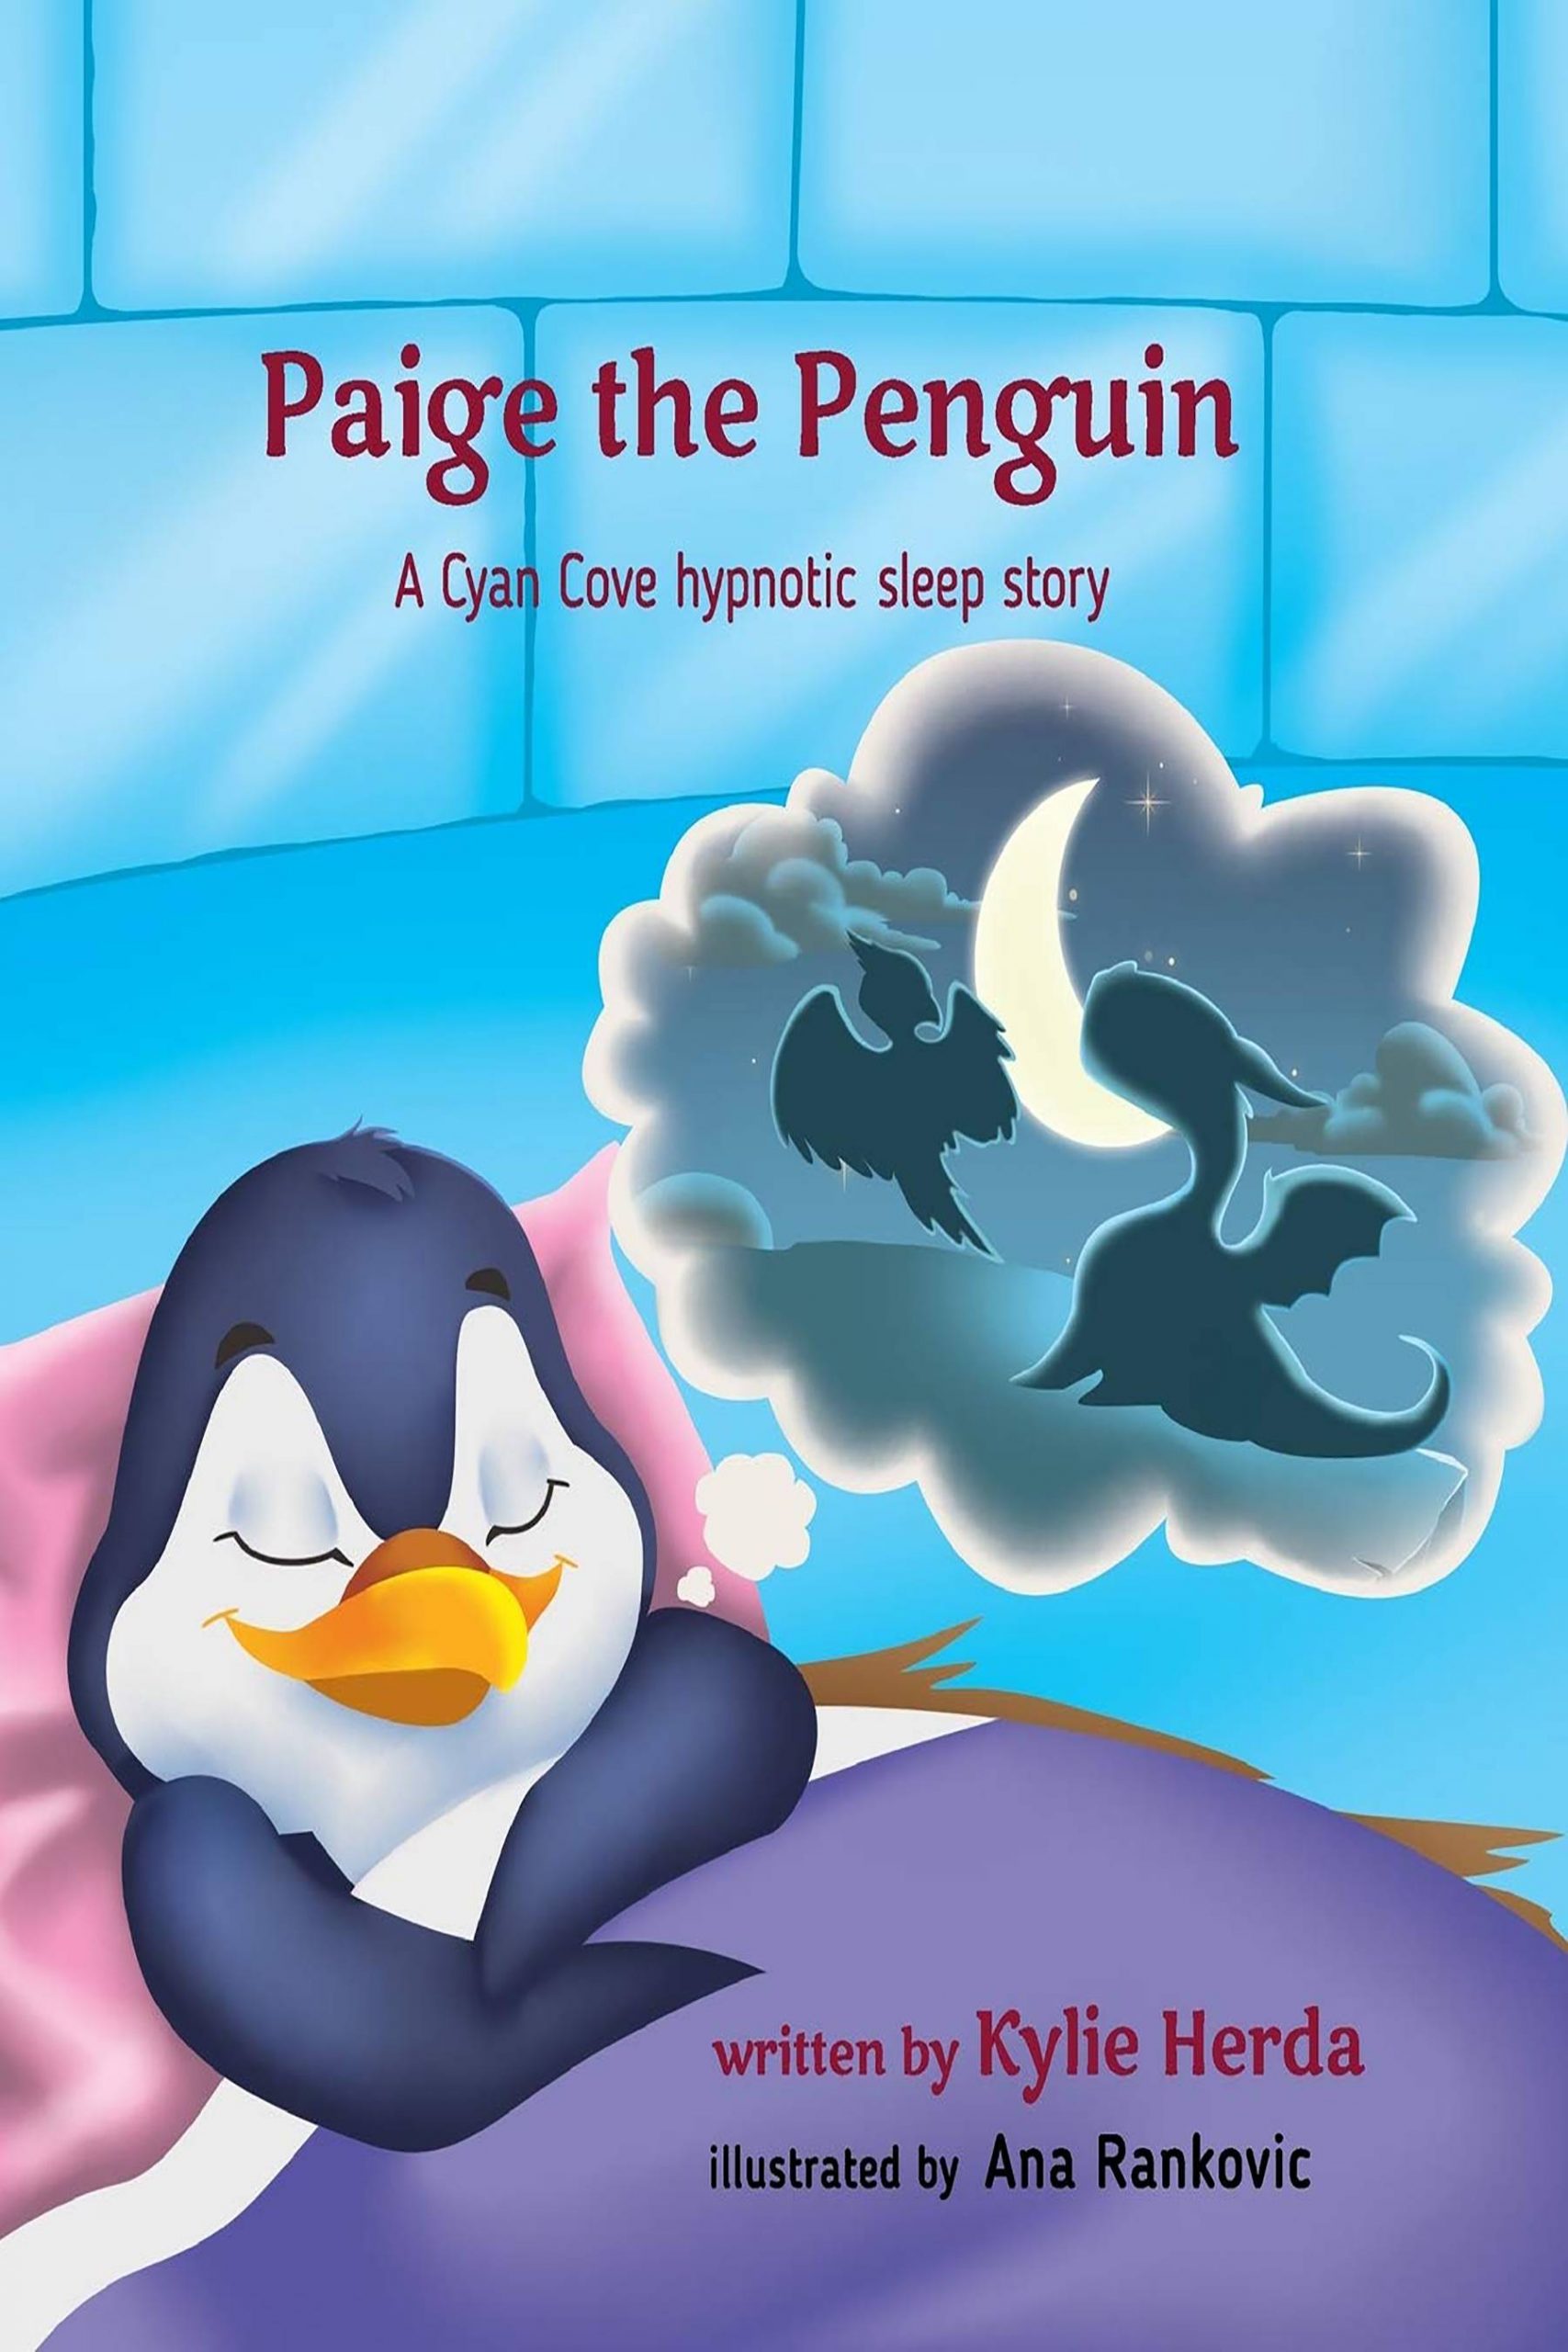 Book-Cover-paige-the-penguin